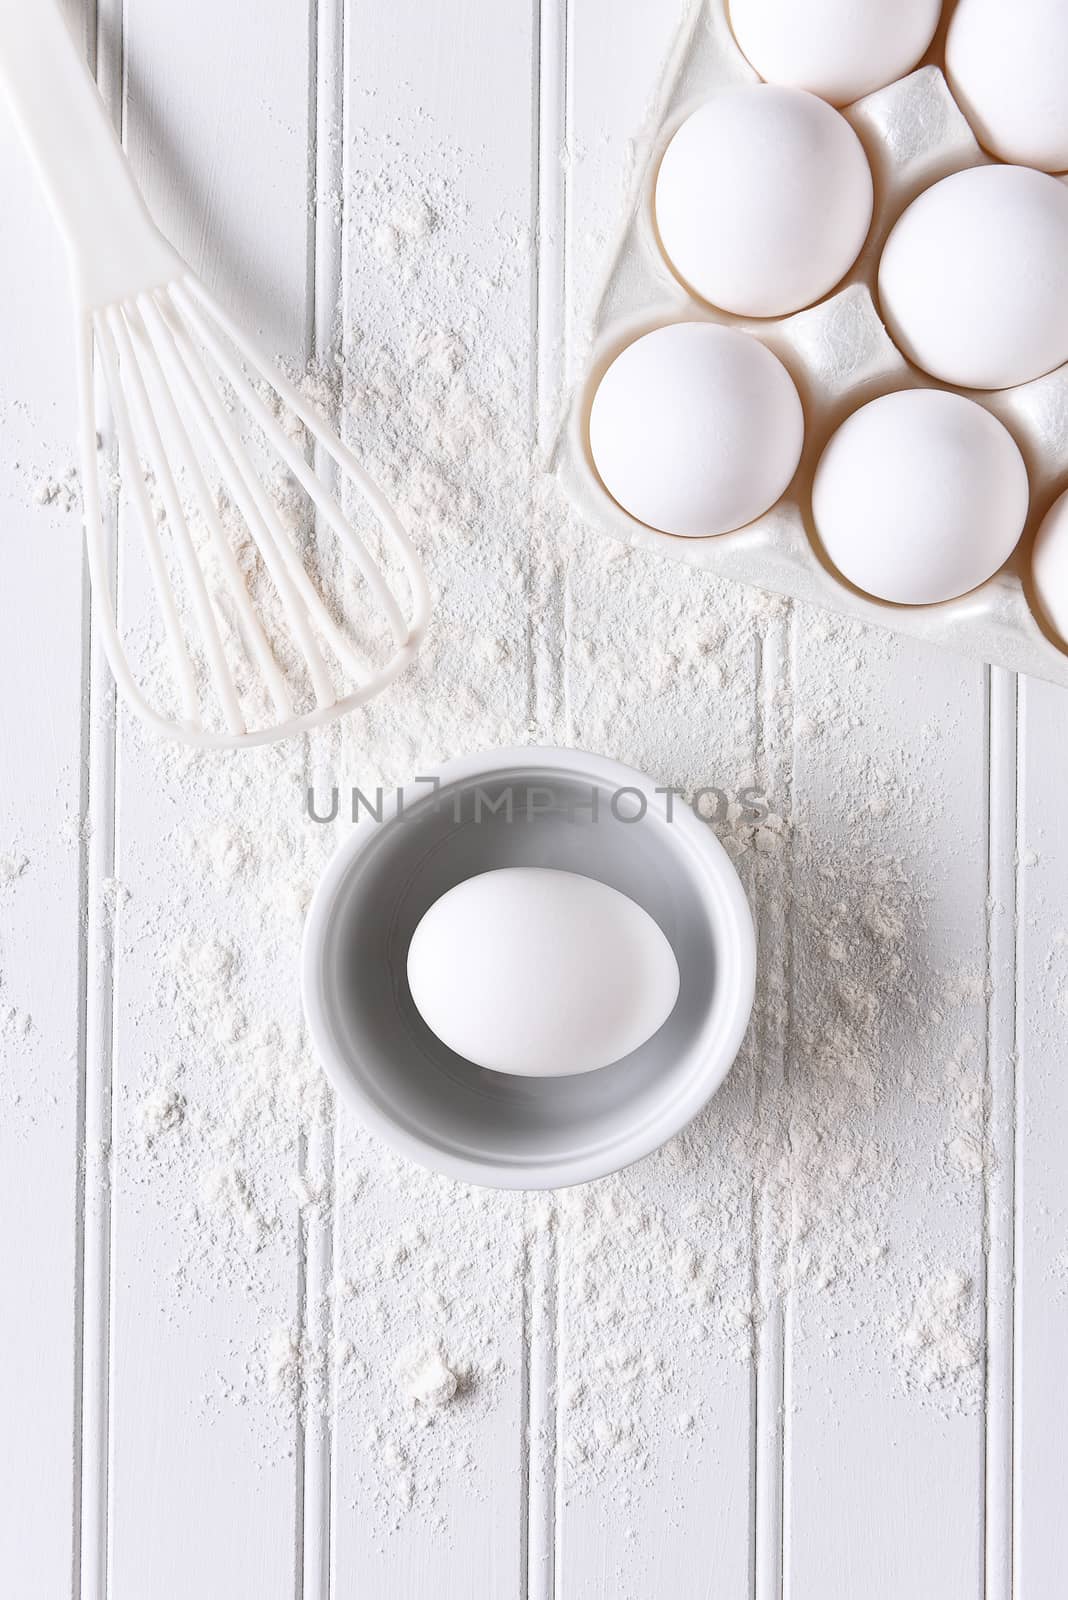 White on White baking still life. Top view of items for baking: eggs, flour and a whisk on a white beadboard surface. 